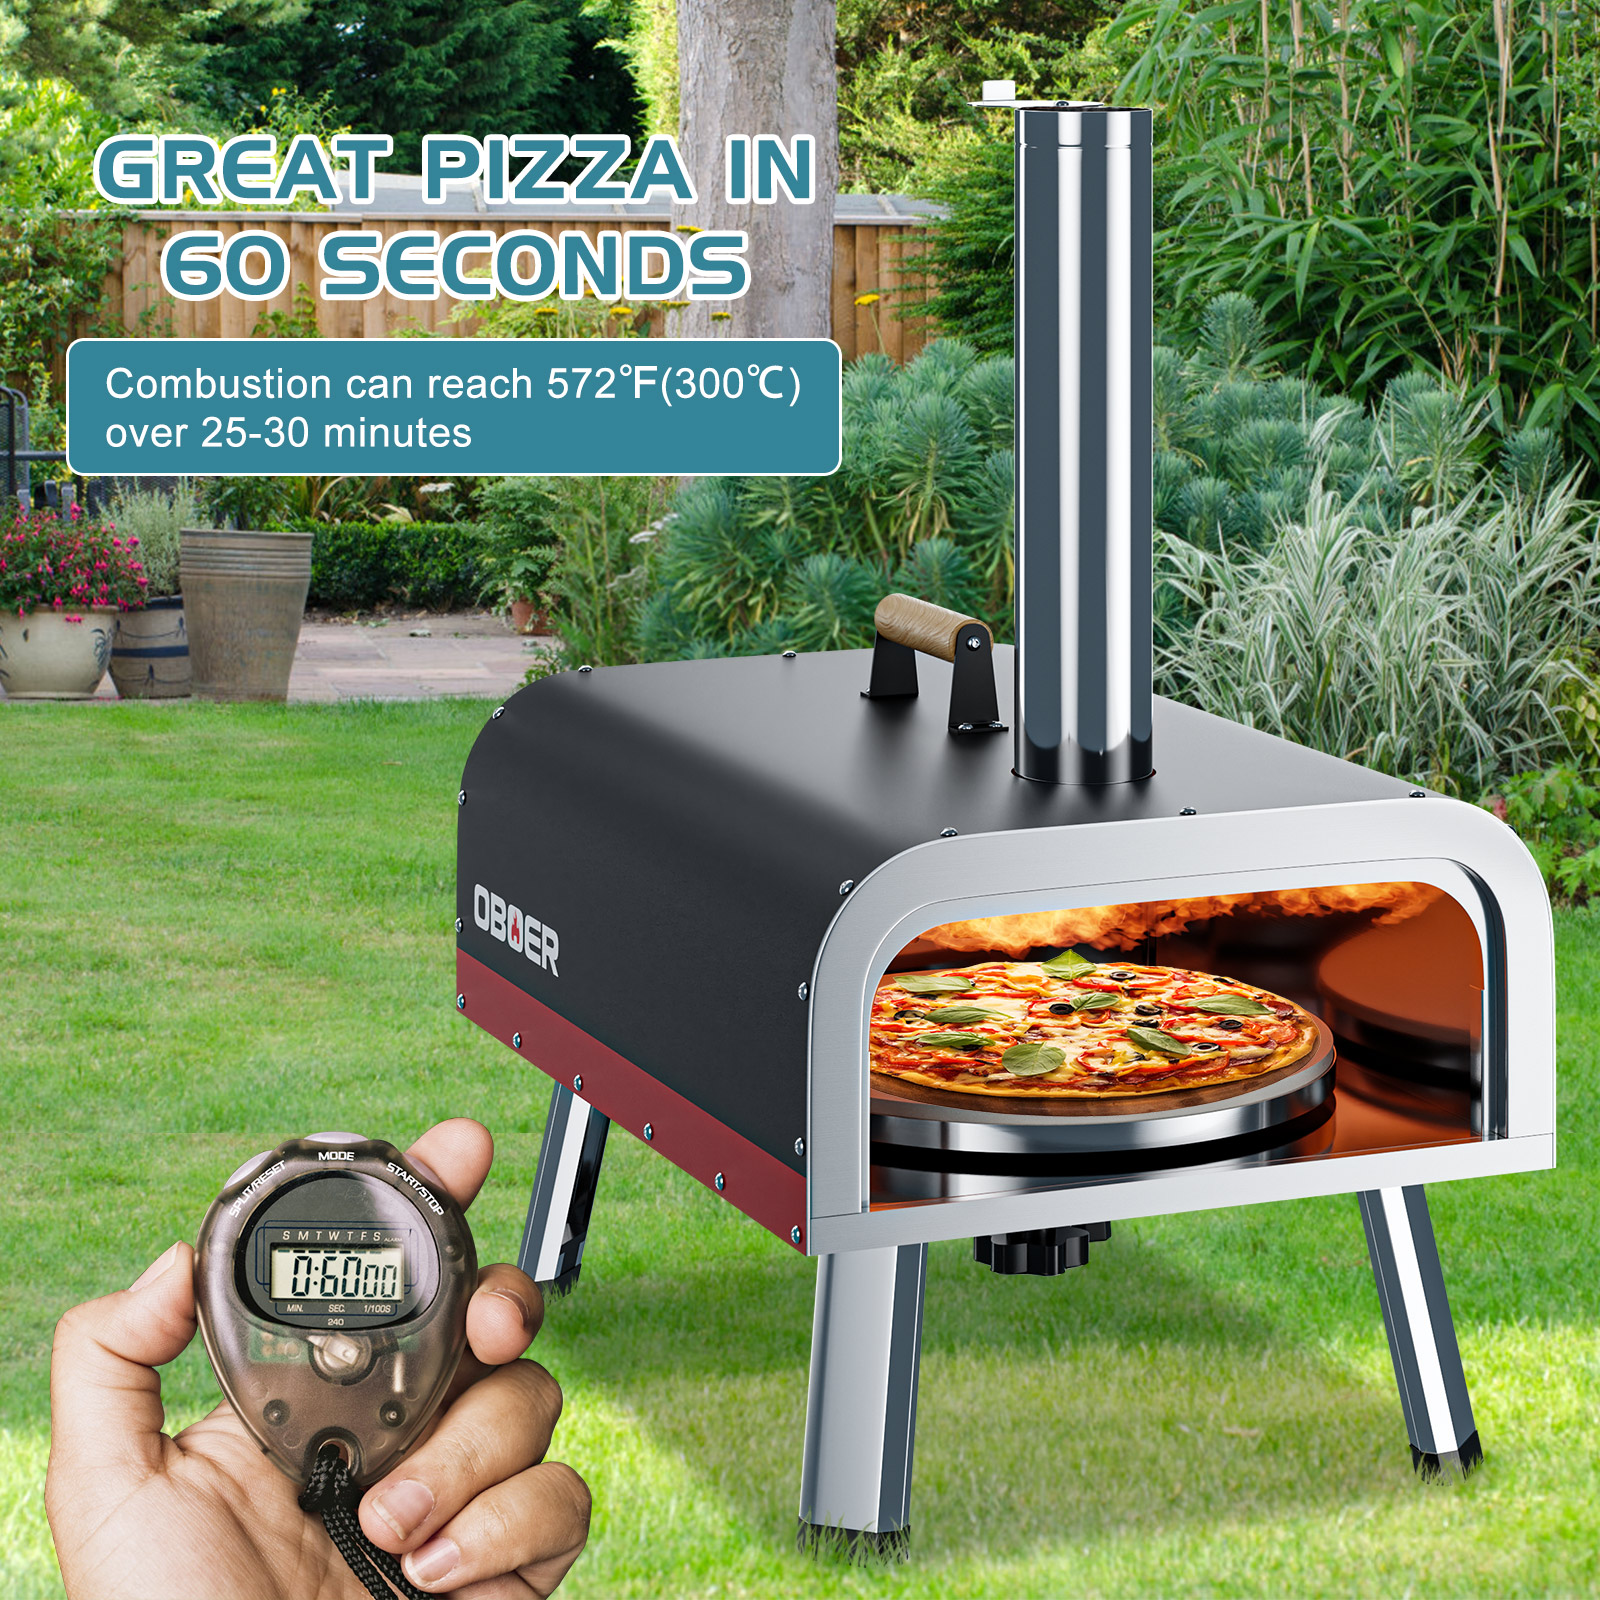 LILYPELLE Portable Pizza Oven, 12" Pellet Pizza Oven, Stainless Steel Pizza Oven Outdoor, Wood &Gas Powered Pizza Oven with Foldable Feet & Complete Accessories - image 4 of 13